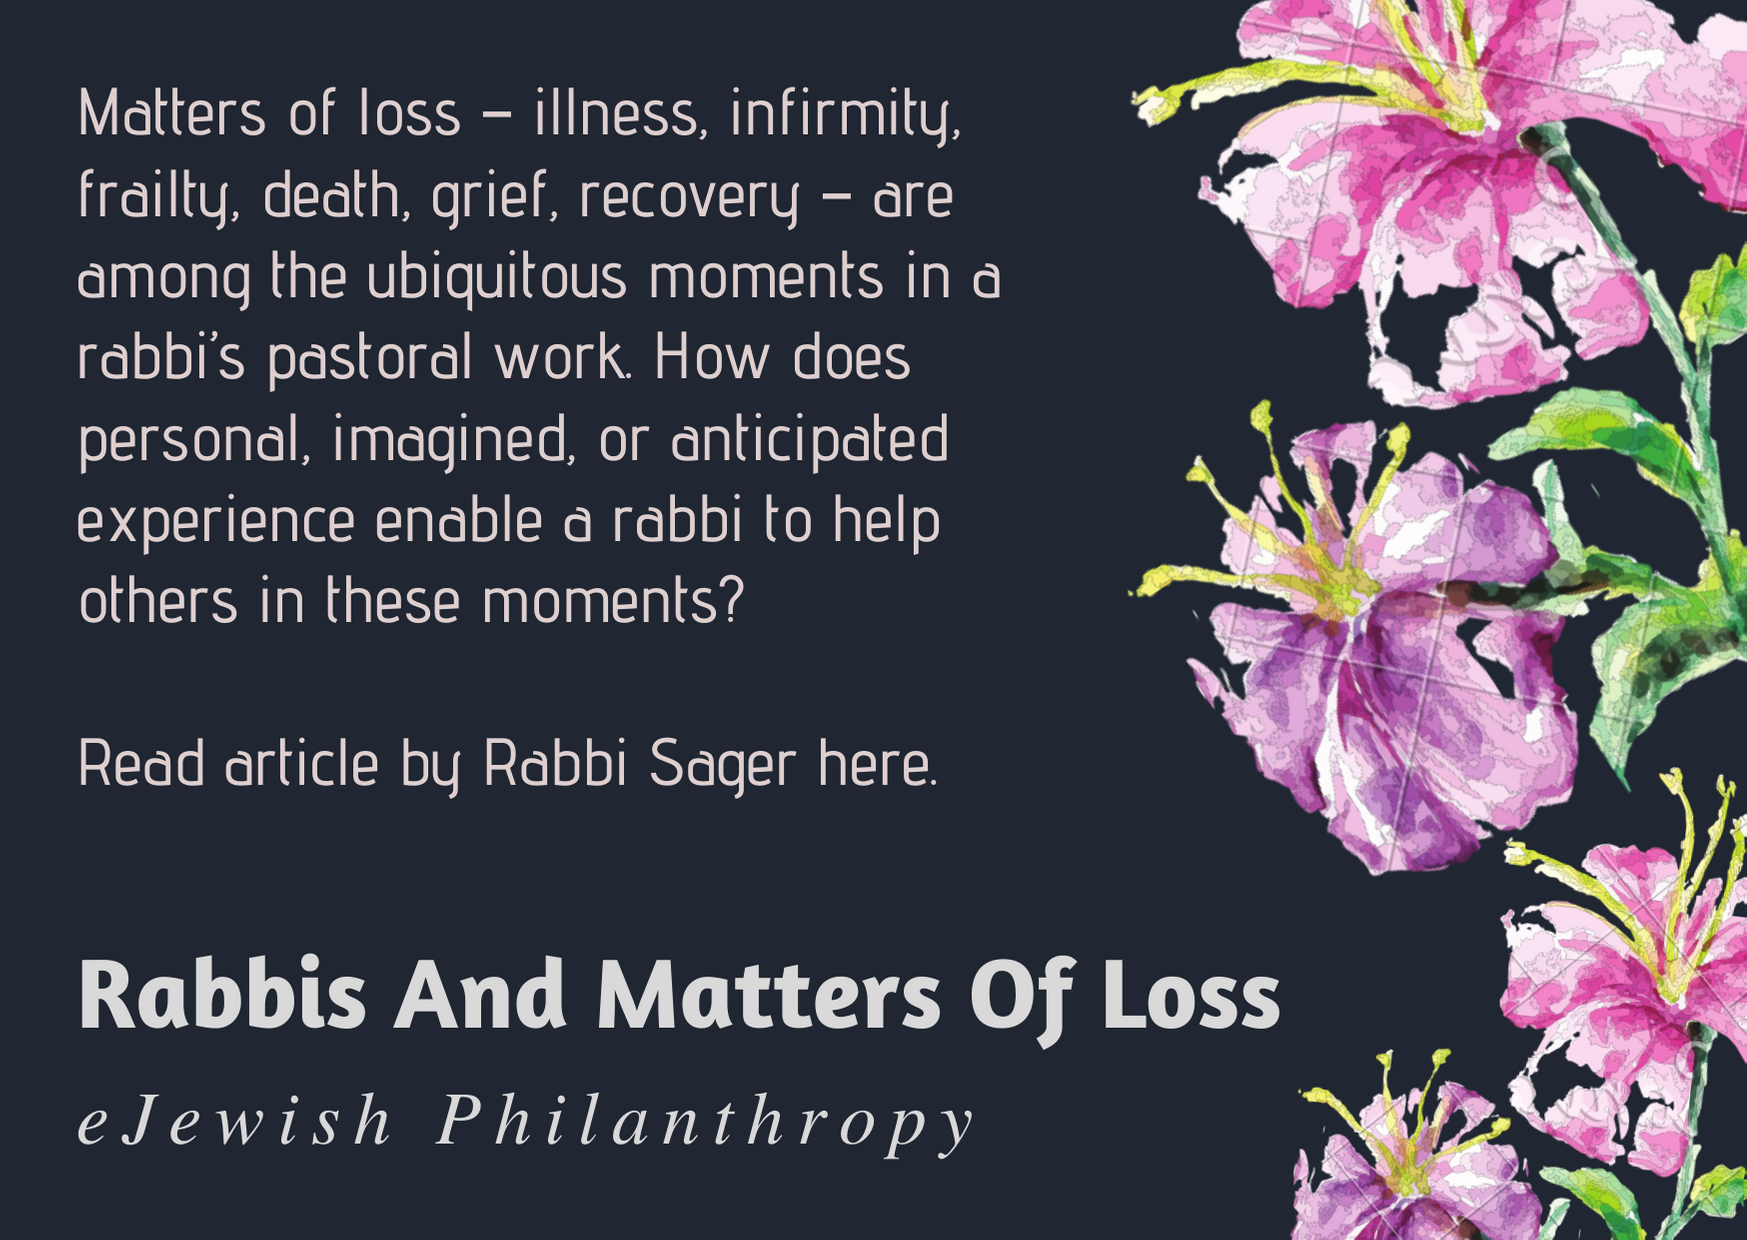 Rabbis and Matters of Loss